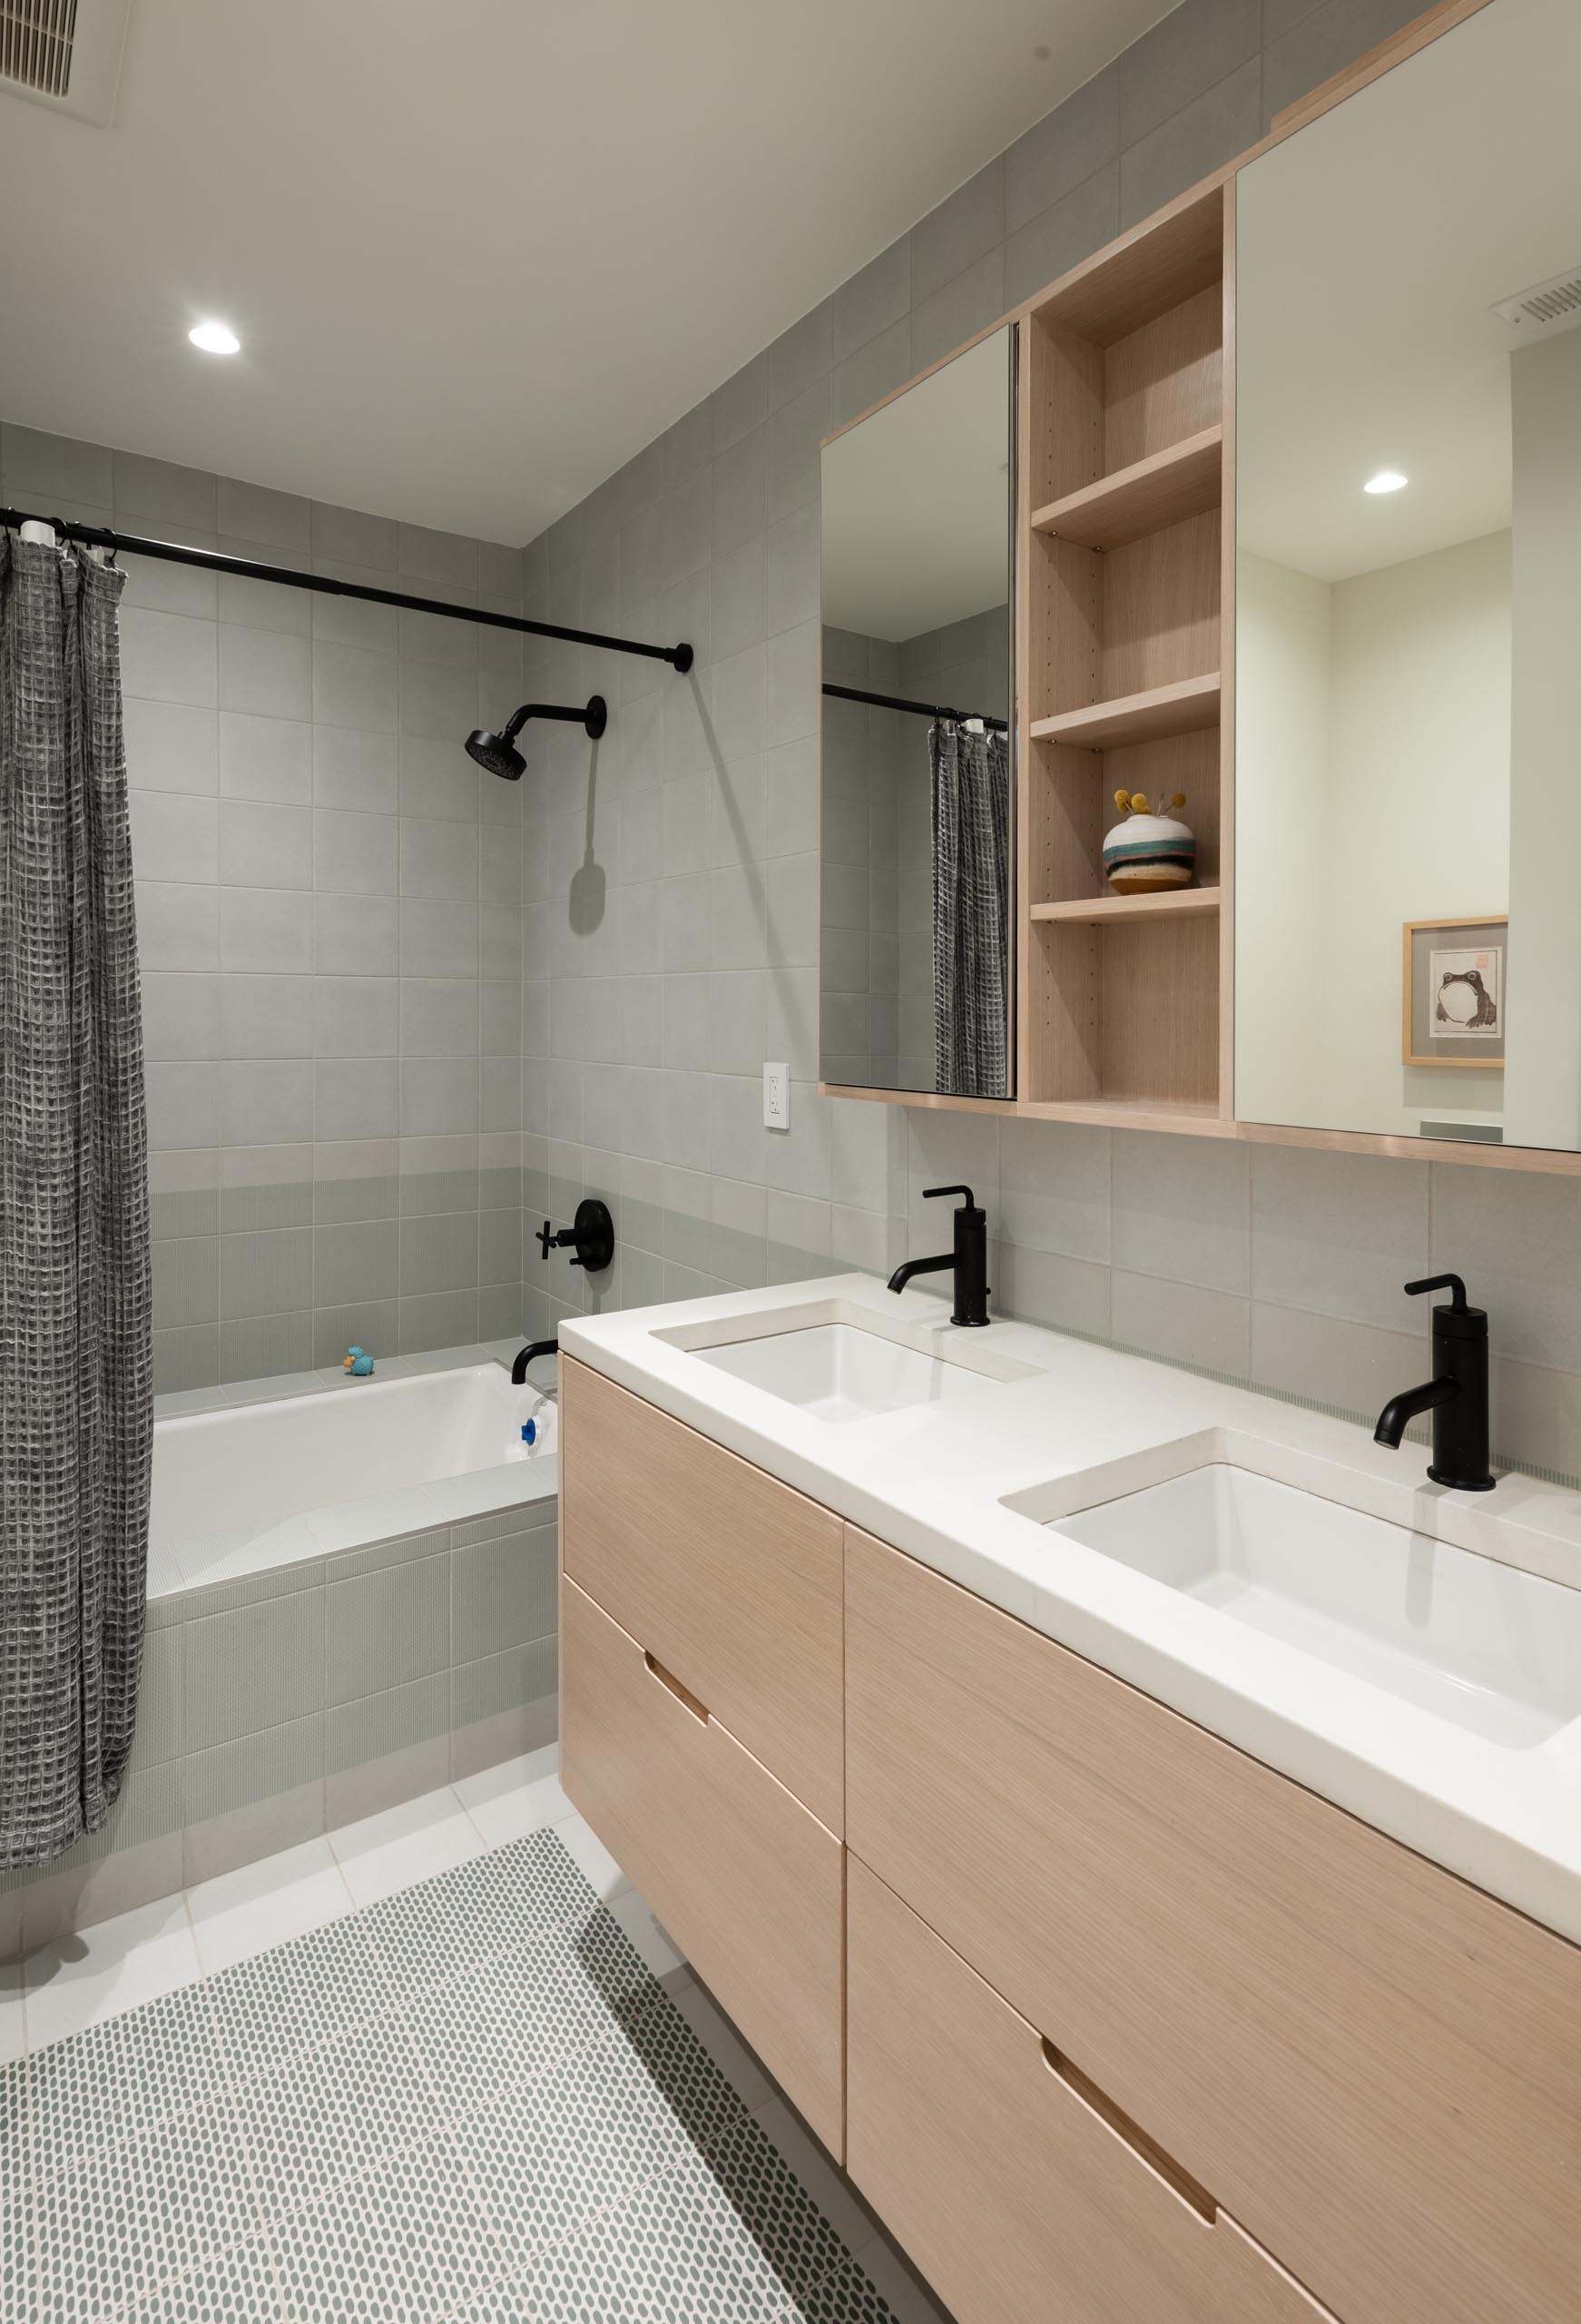 A modern bathroom with a light wood vanity, white countertop, and a shower/bath lined with square gray tiles.